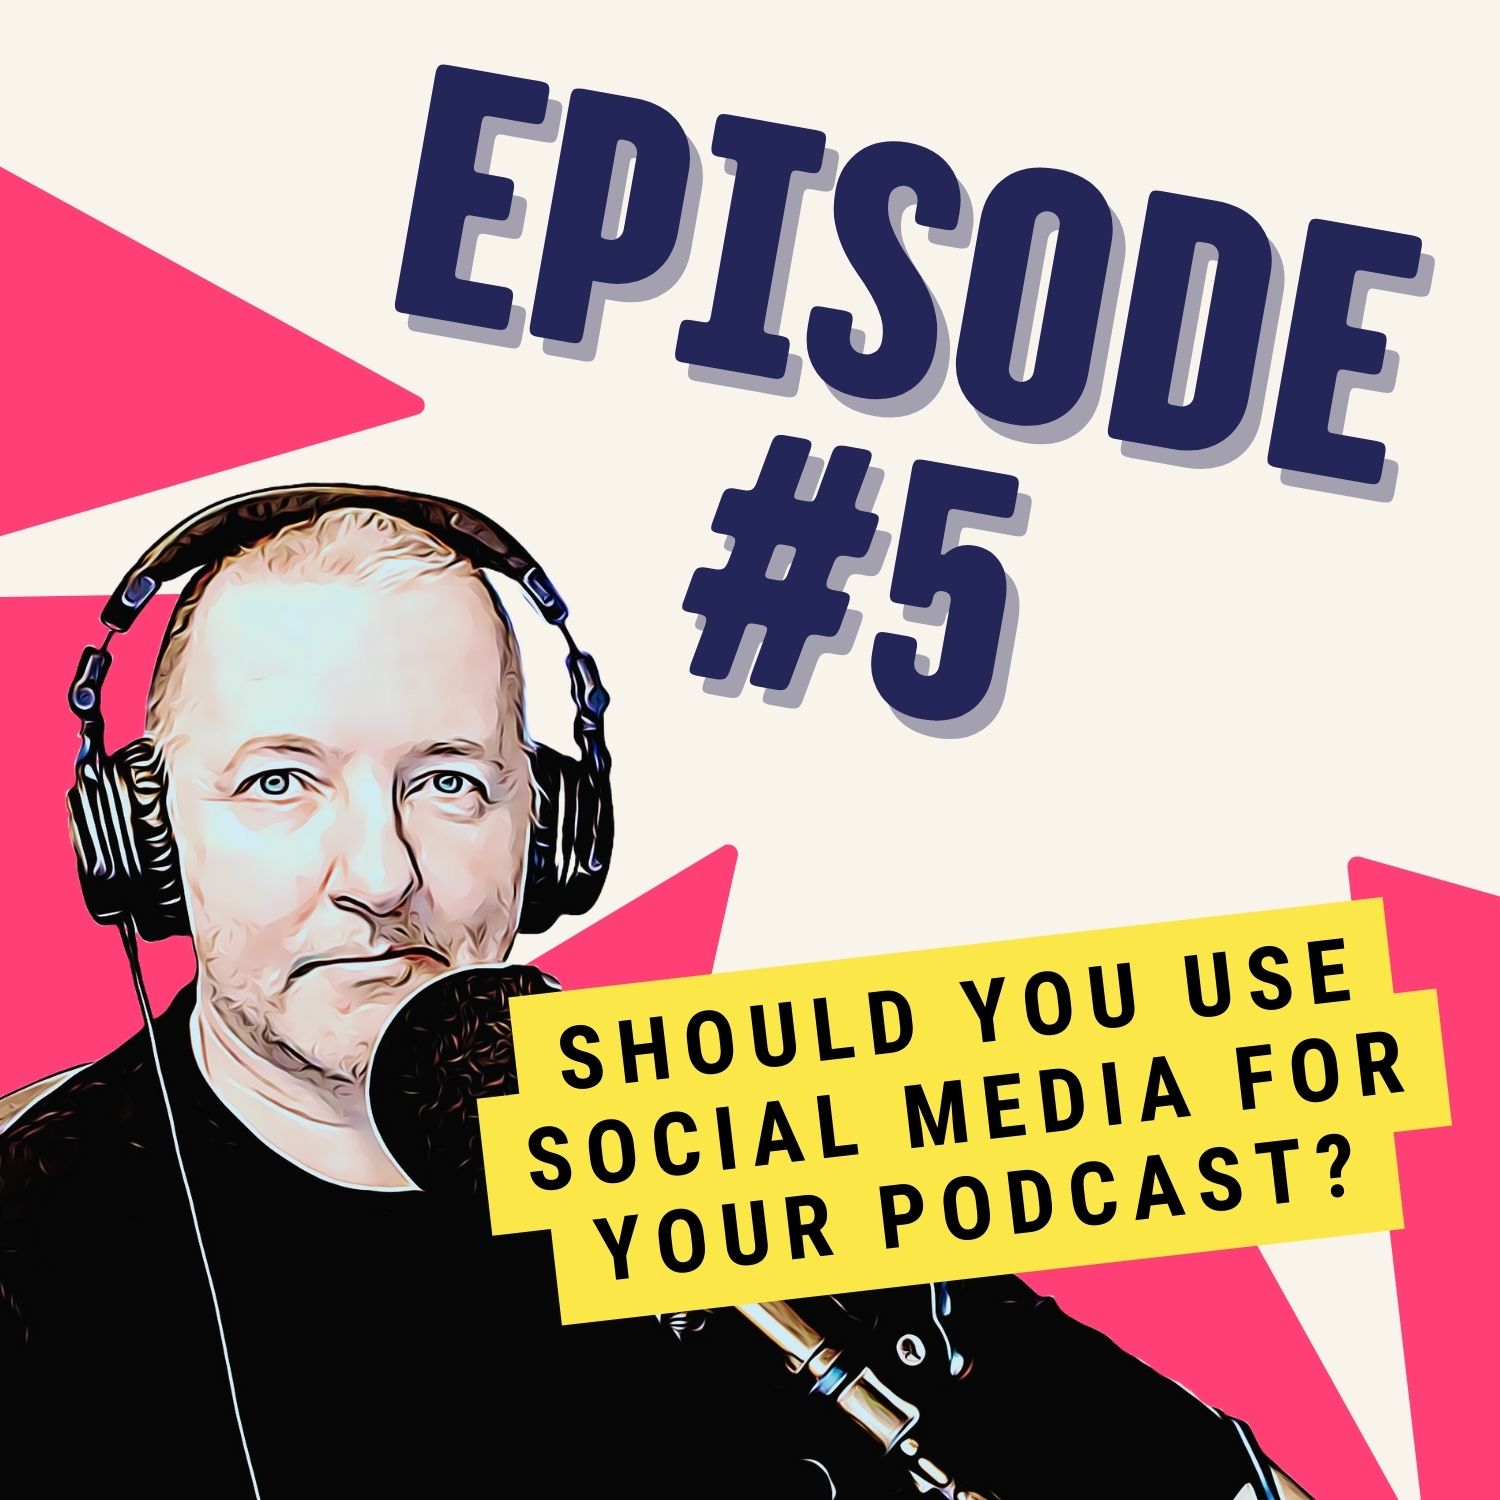 Should You Use Social Media for Your Podcast?